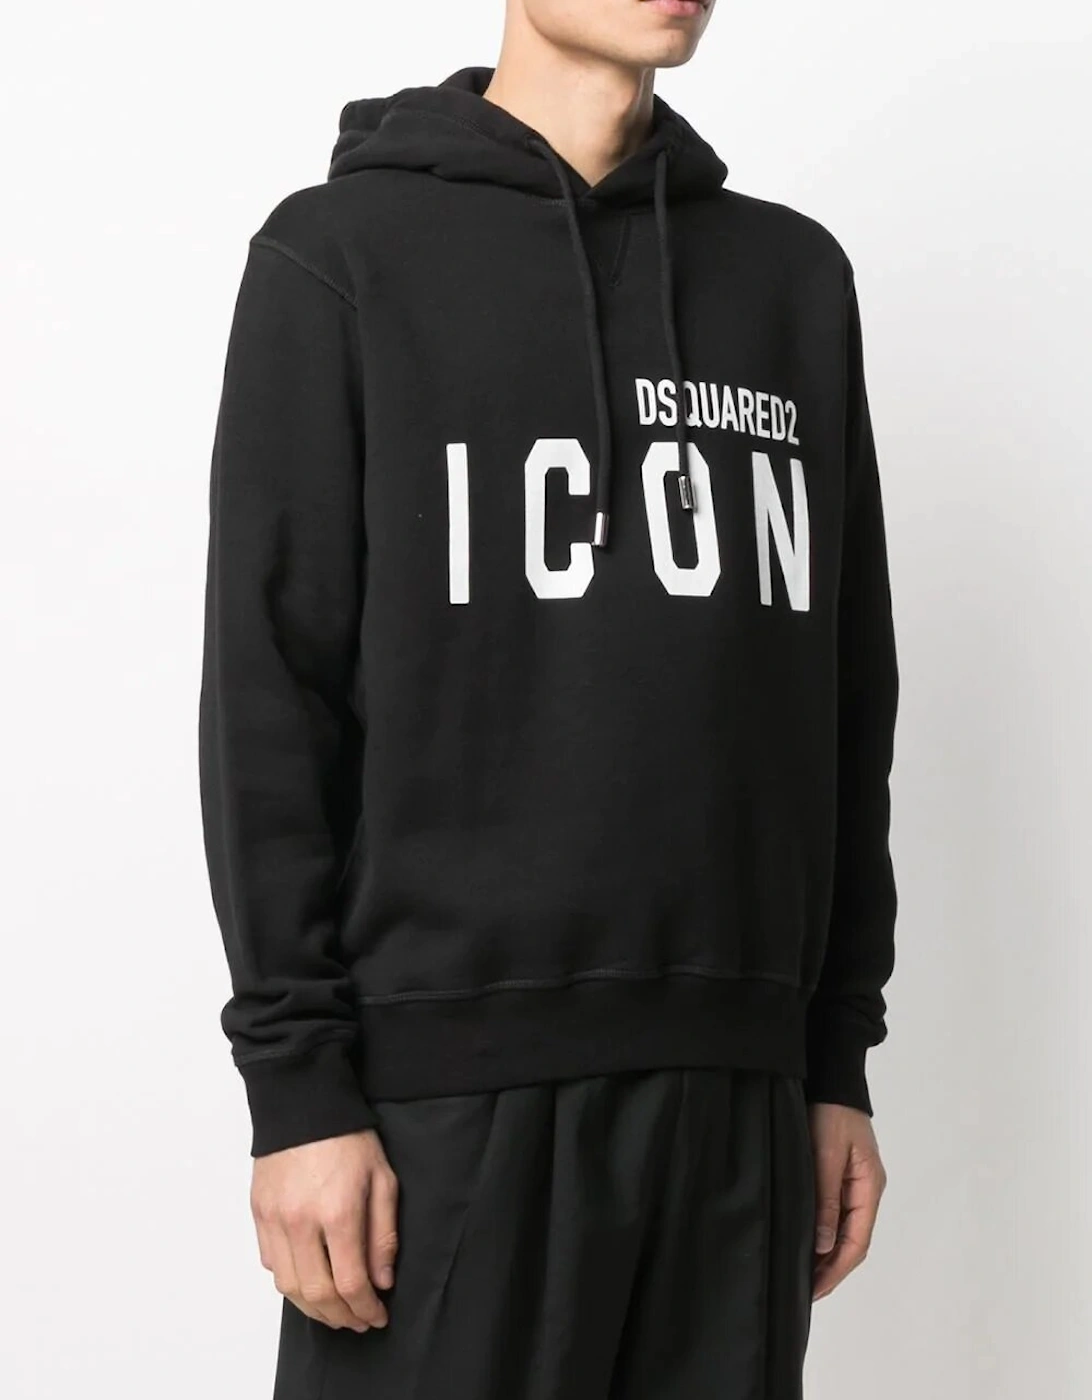 ICON Hoodie and Short Set in Black